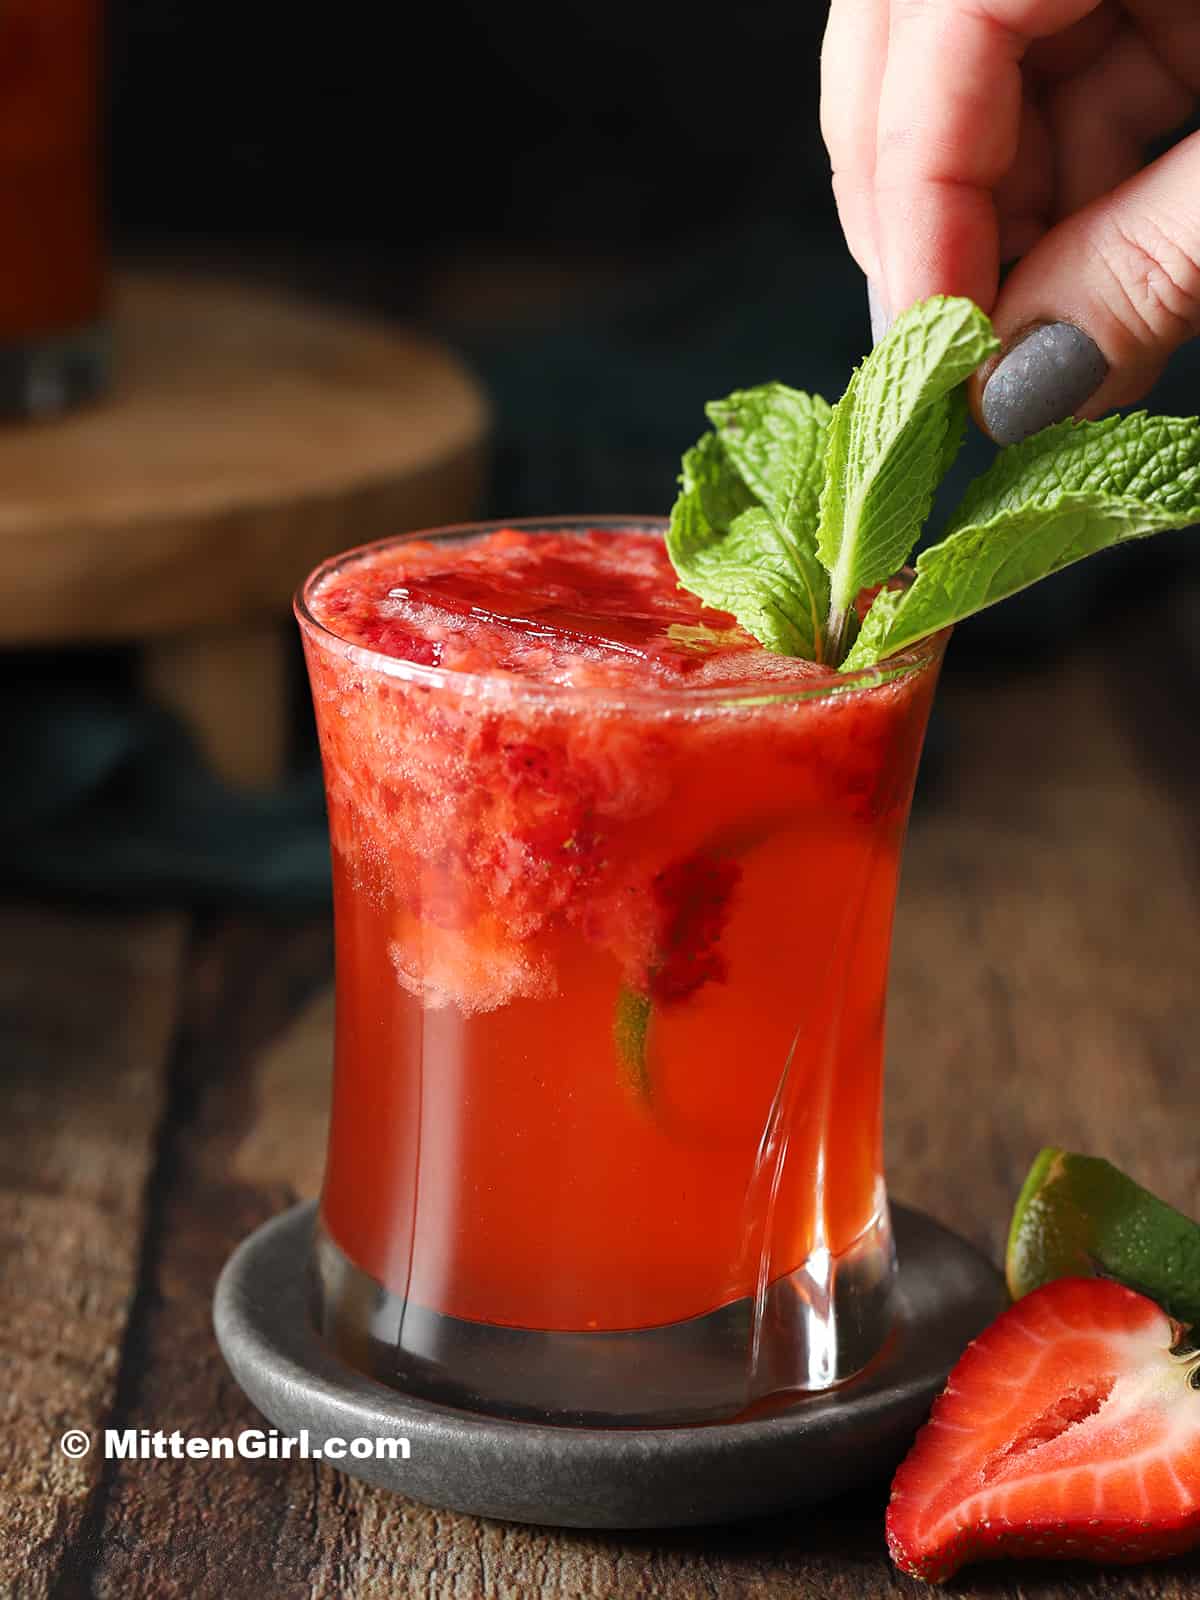 A hand garnishing a strawberry gin cocktail with a mint sprig.